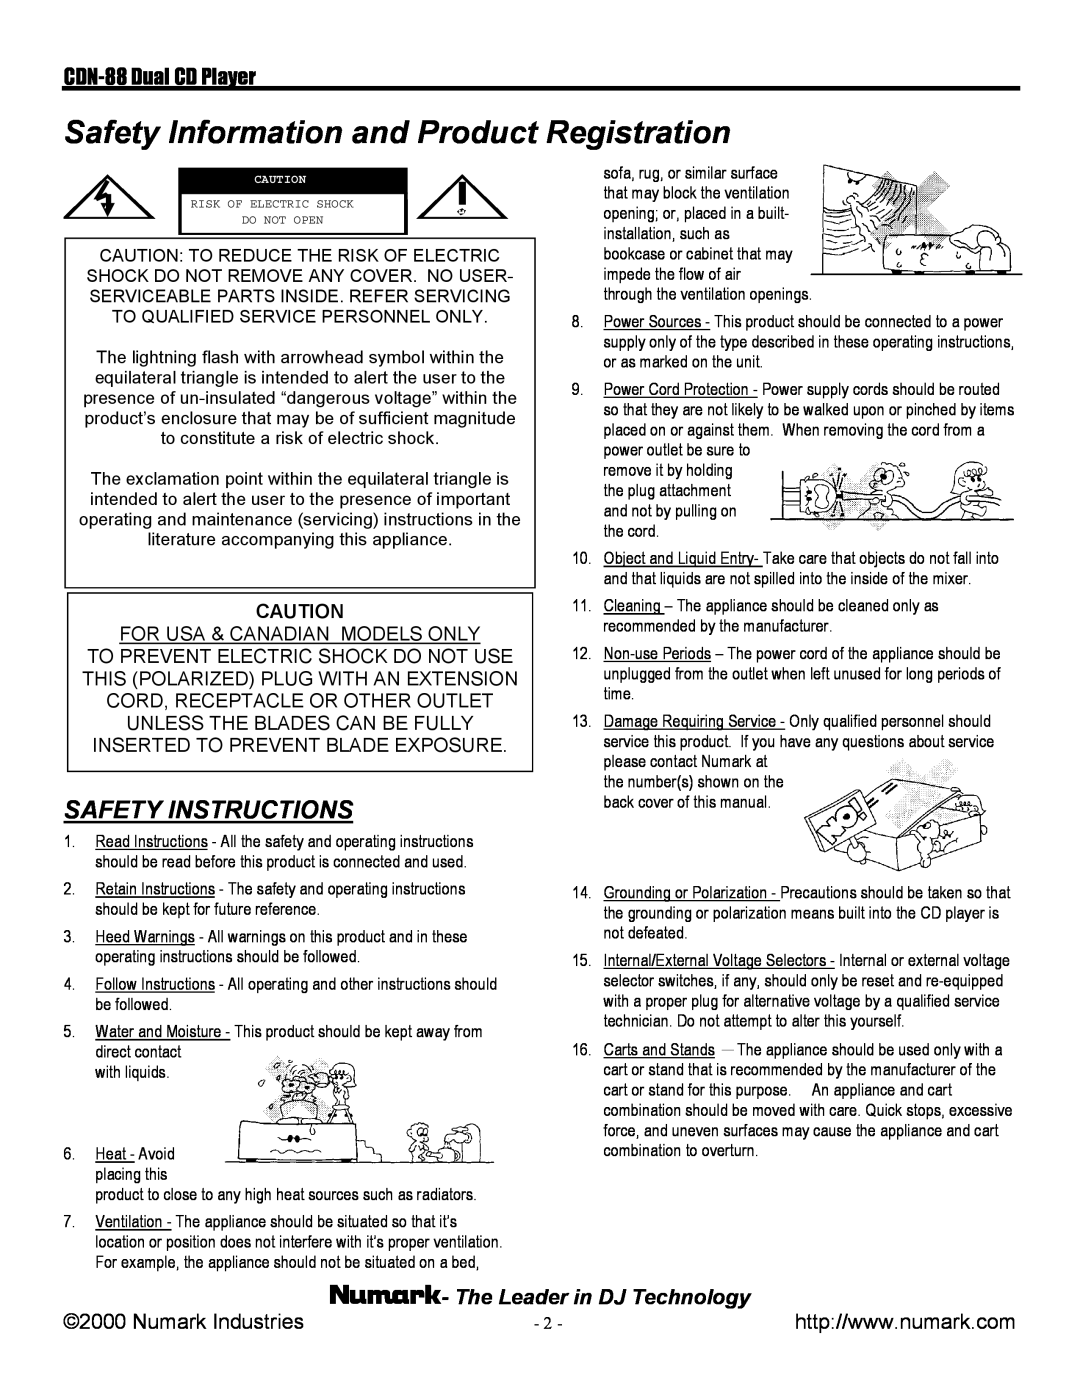 Numark Industries manual Safety Information and Product Registration, CDN-88Dual CD Player, The Leader in DJ Technology 